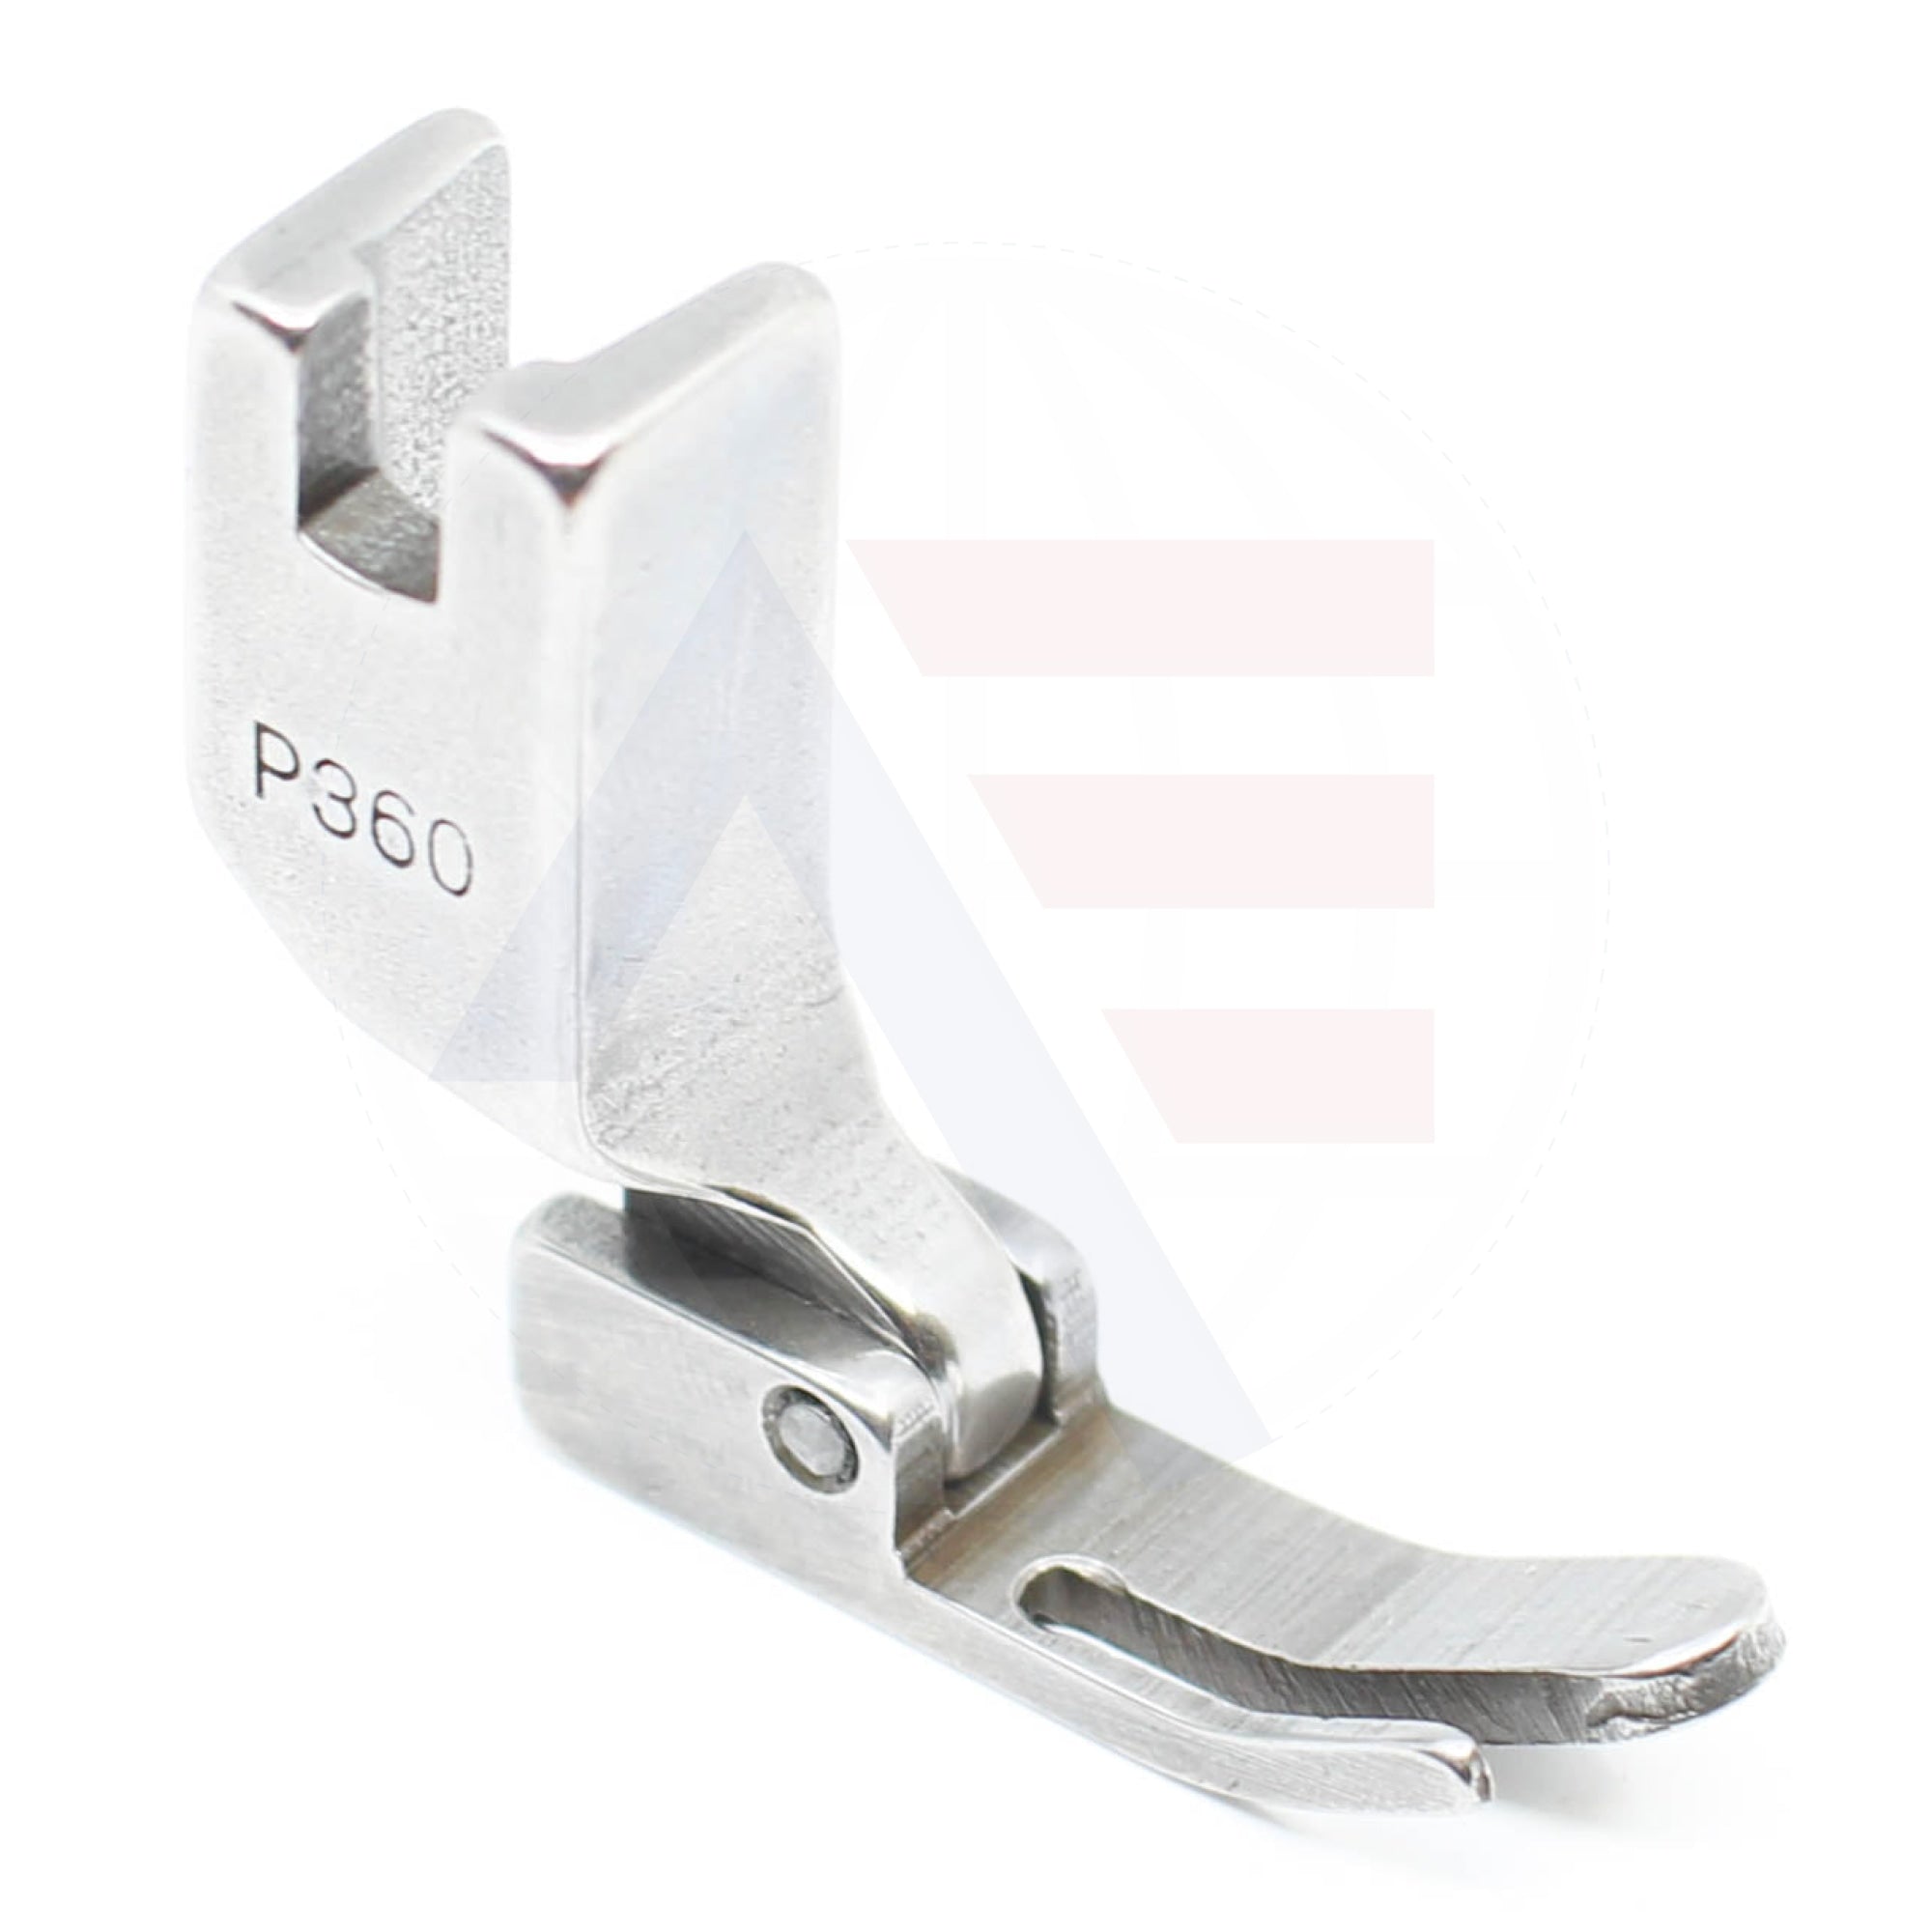 P360 Hinged Zipper Foot Sewing Machine Spare Parts